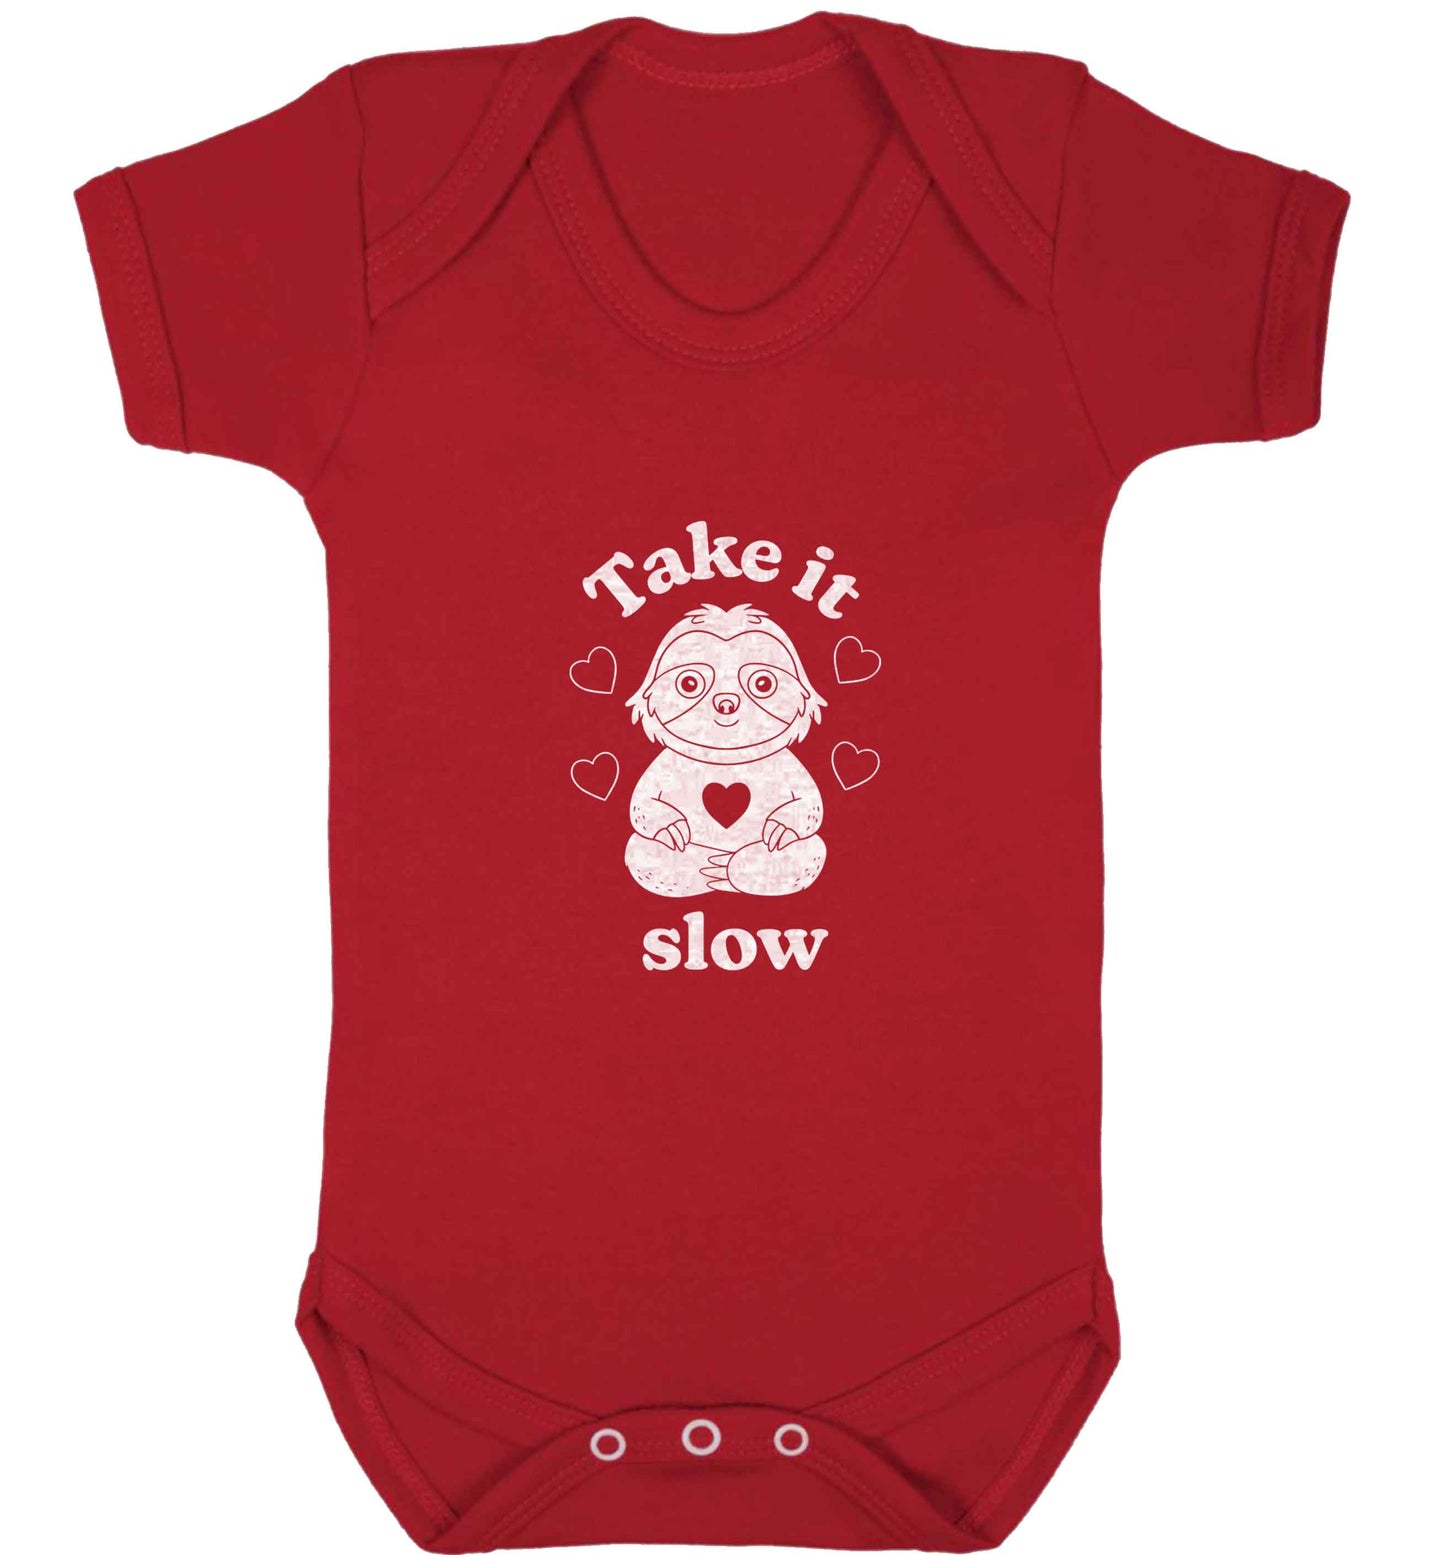 Take it slow baby vest red 18-24 months